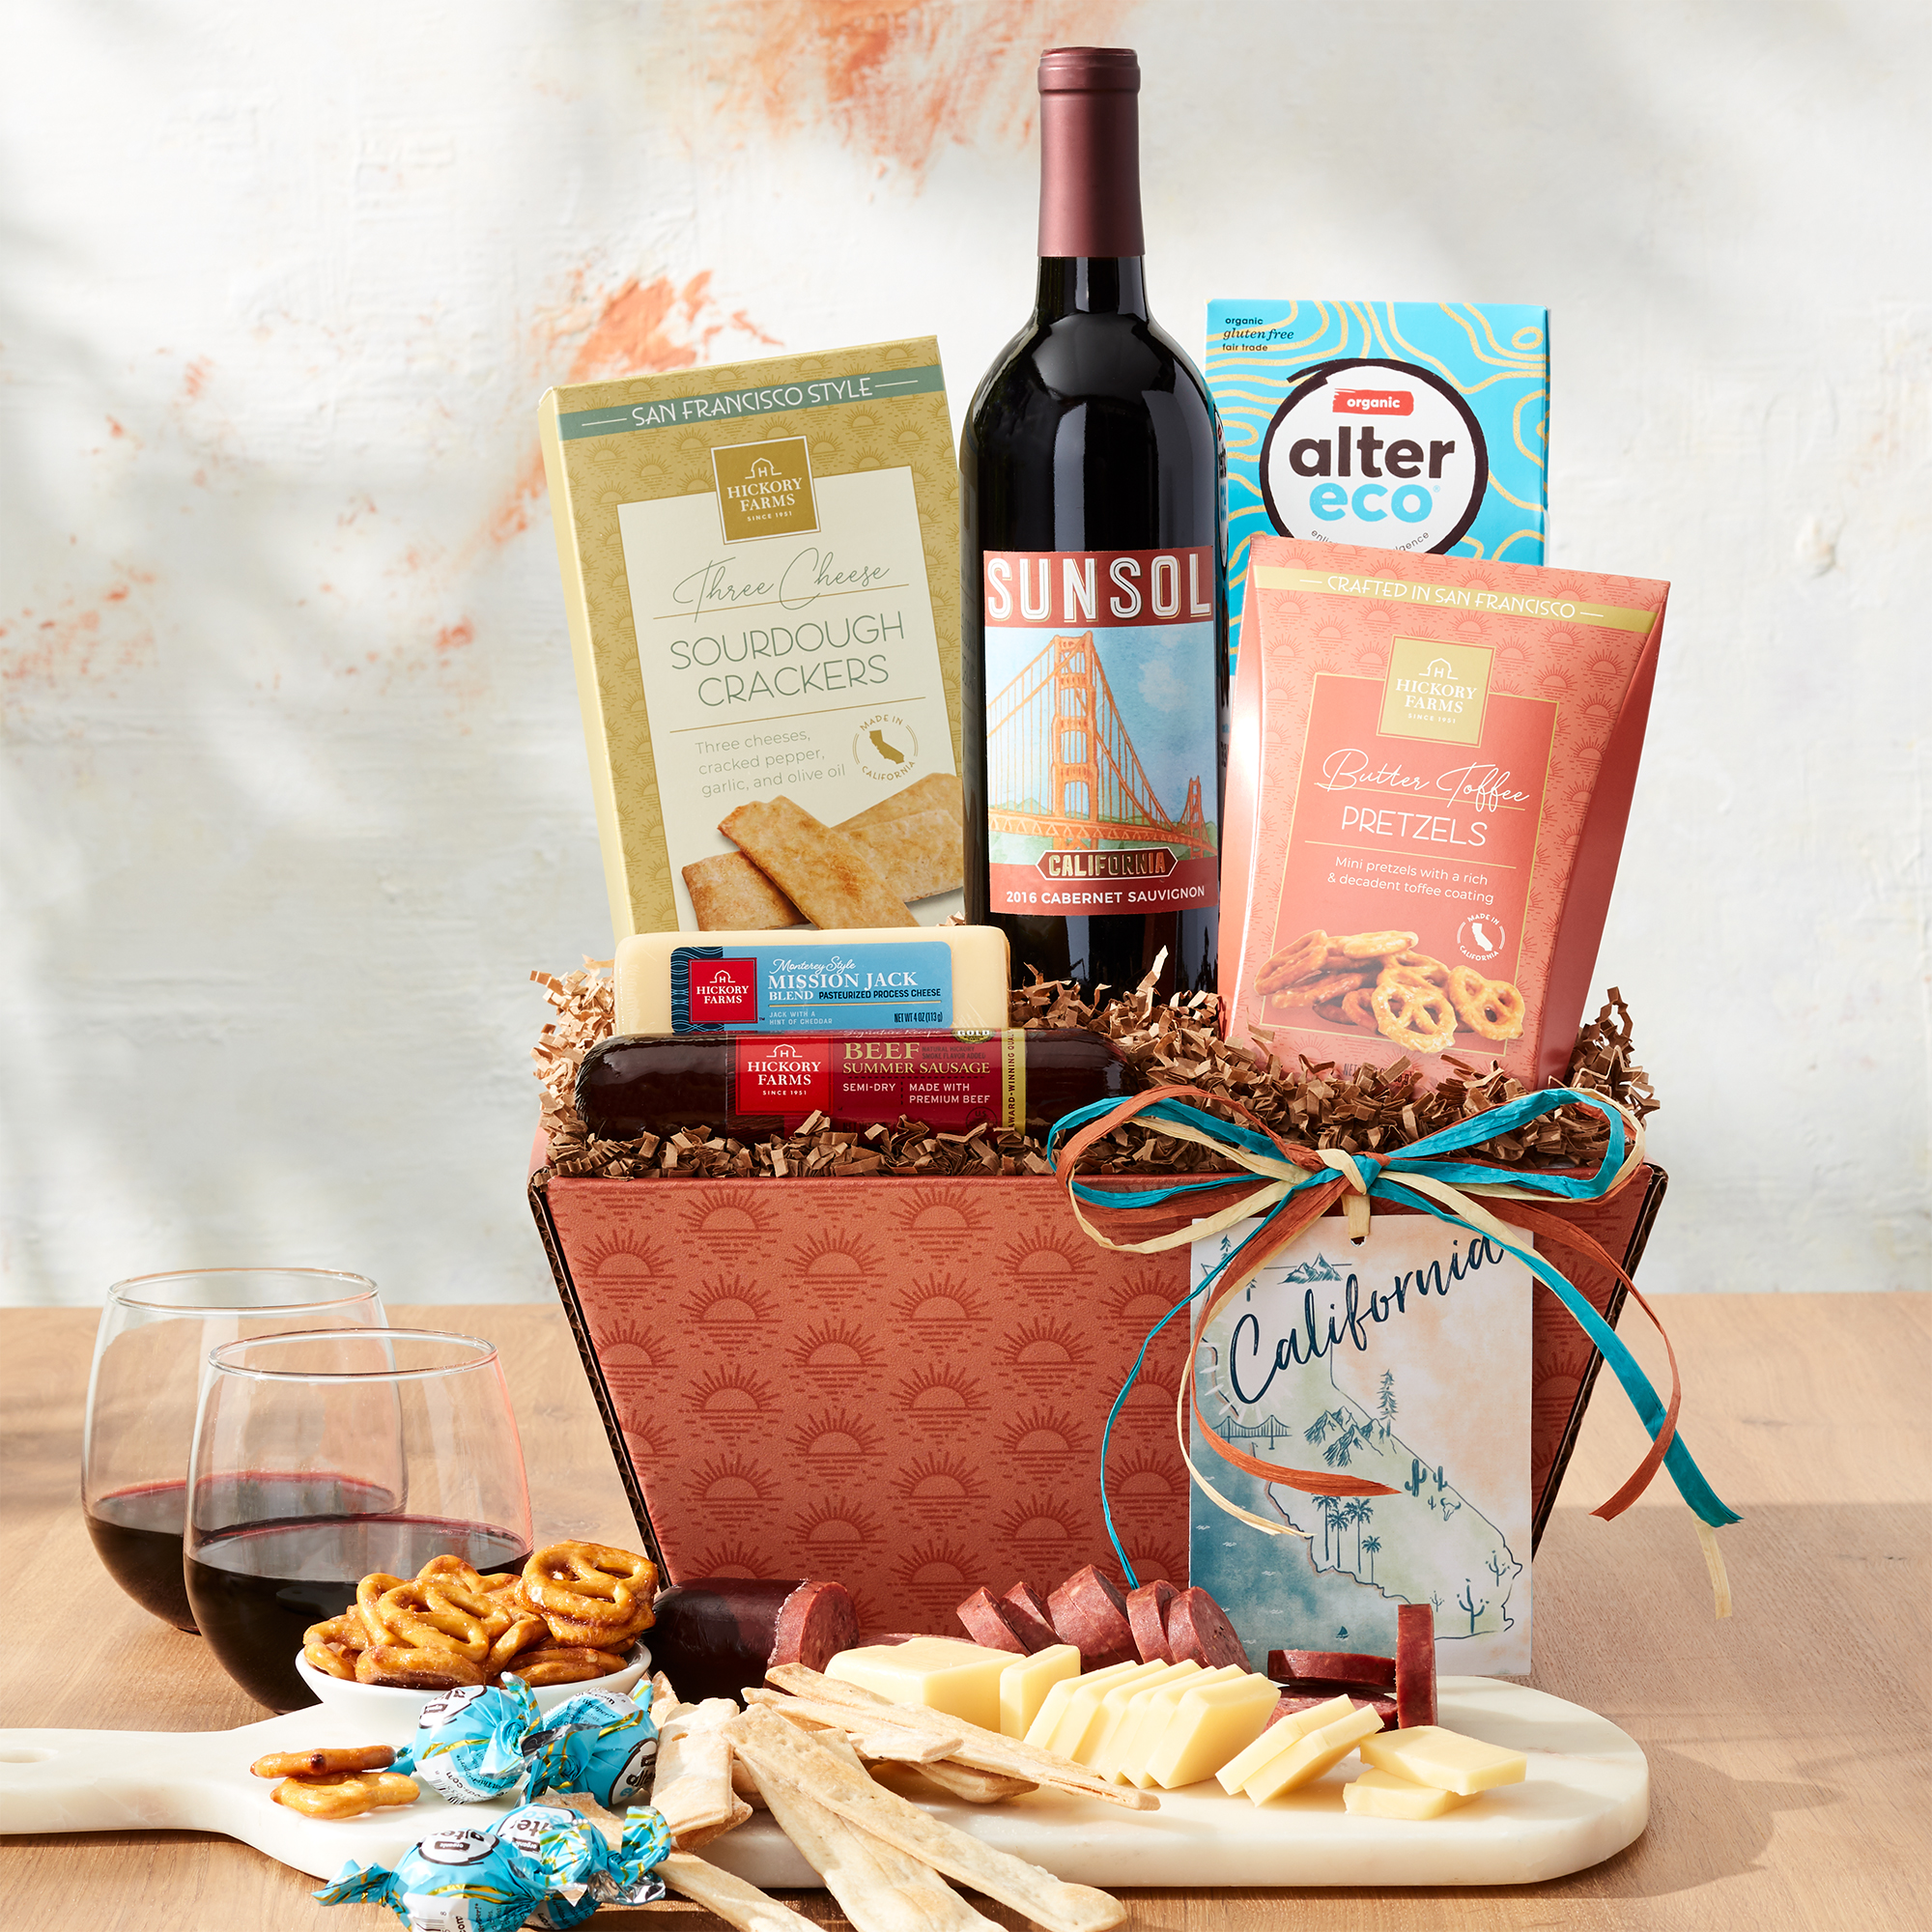 Summer Sausage & Cheese Gift Box - 54.99 USD, Hickory Farms